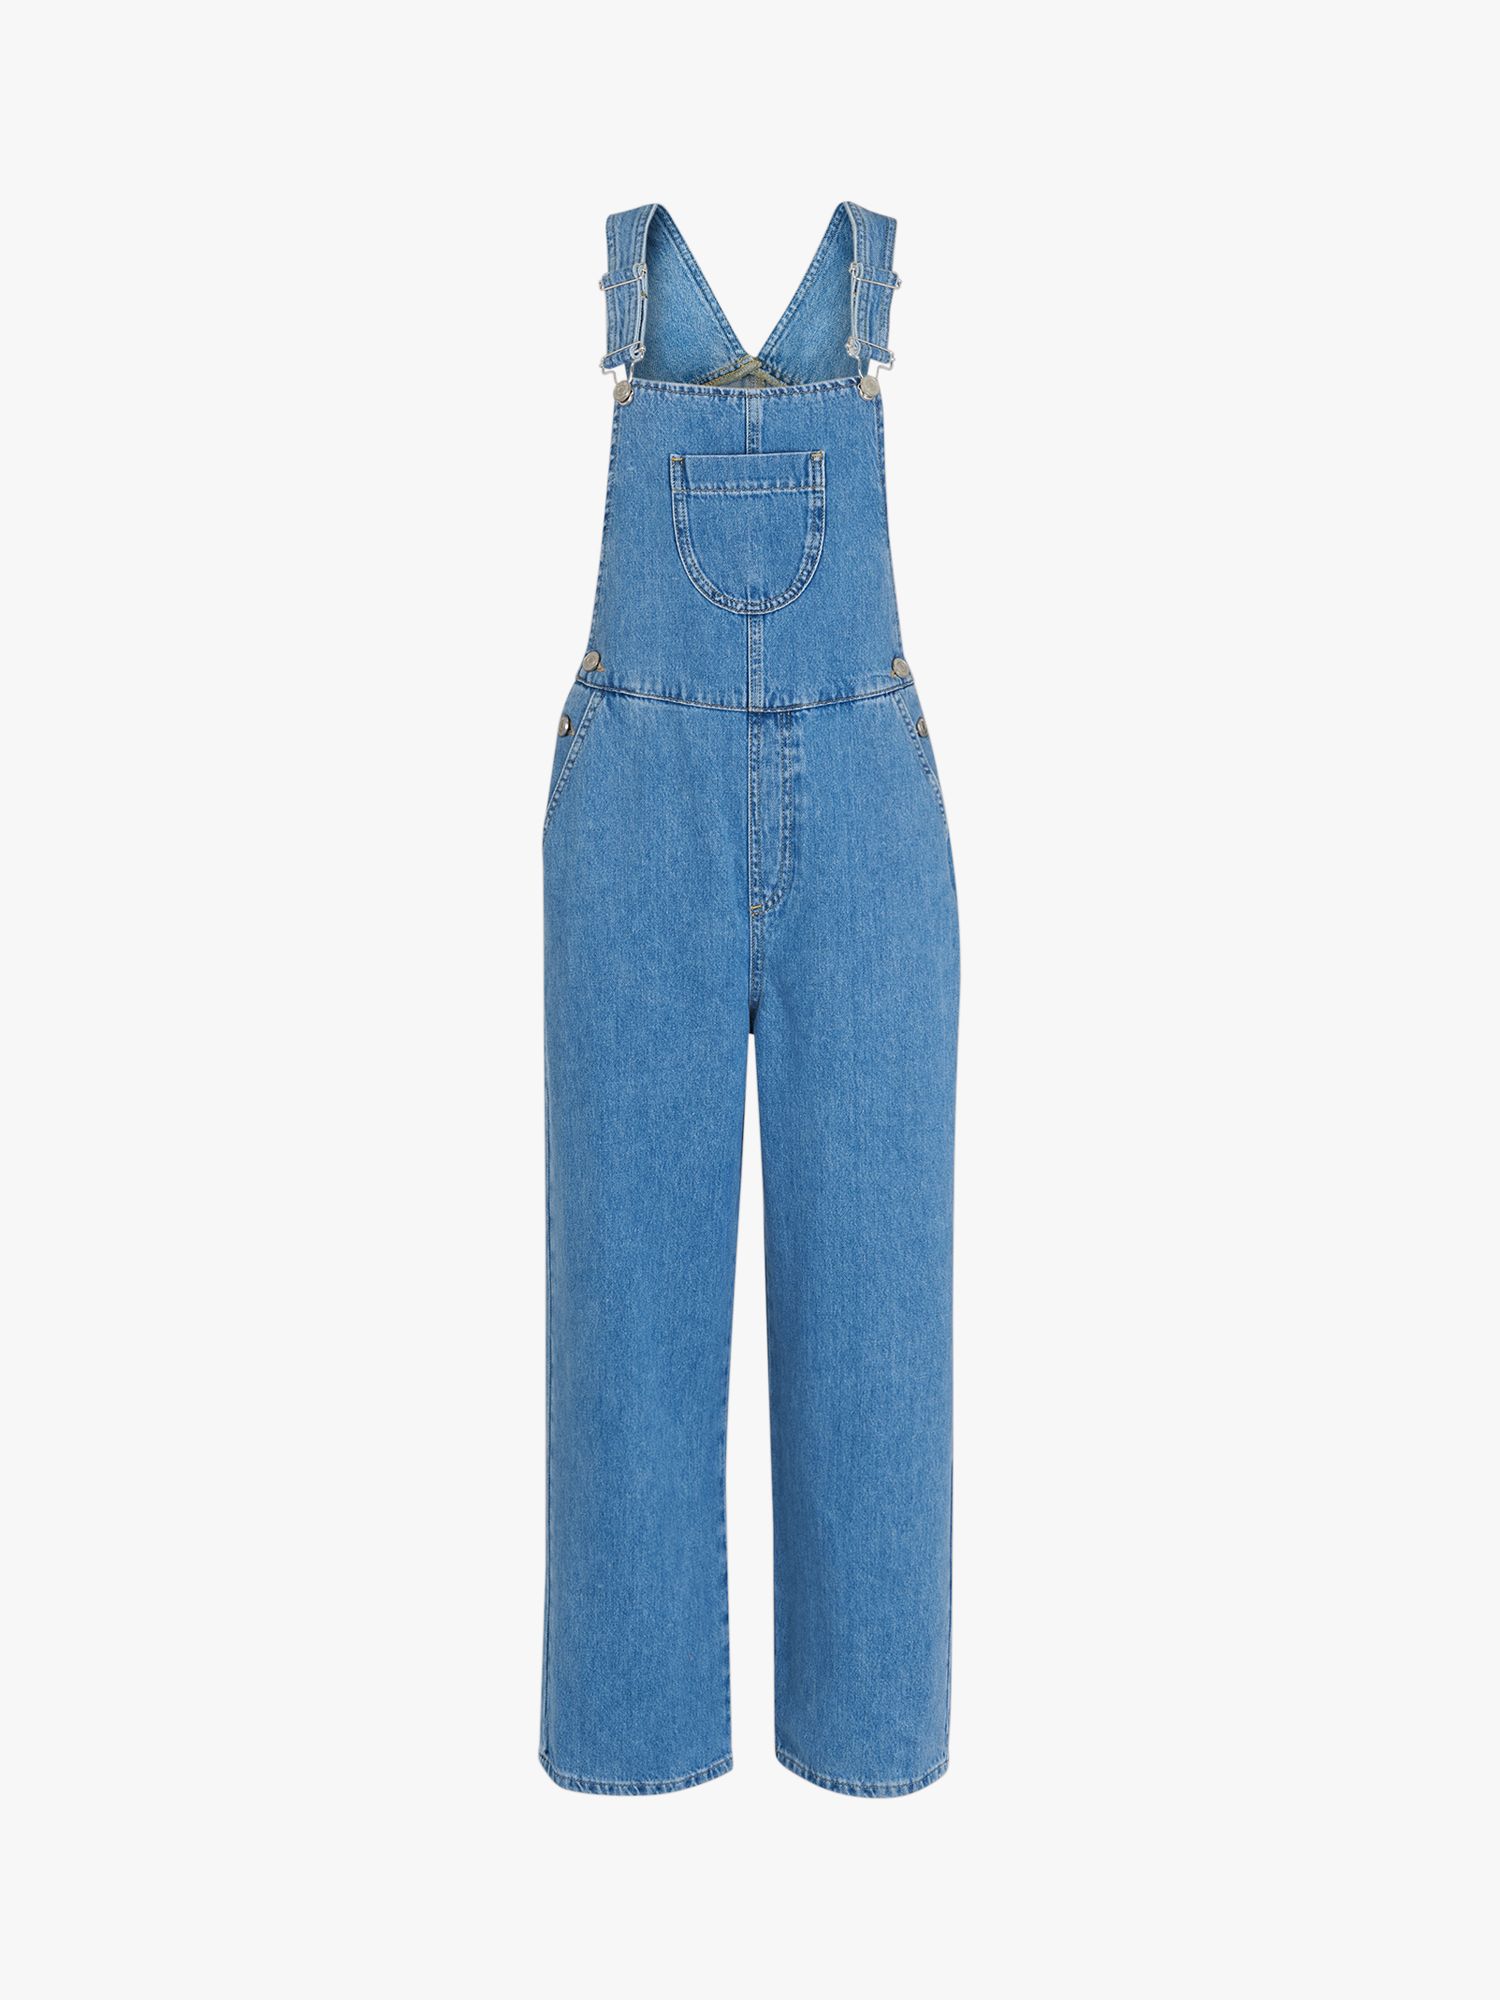 Buy Whistles Molly Denim Dungarees, Blue Online at johnlewis.com